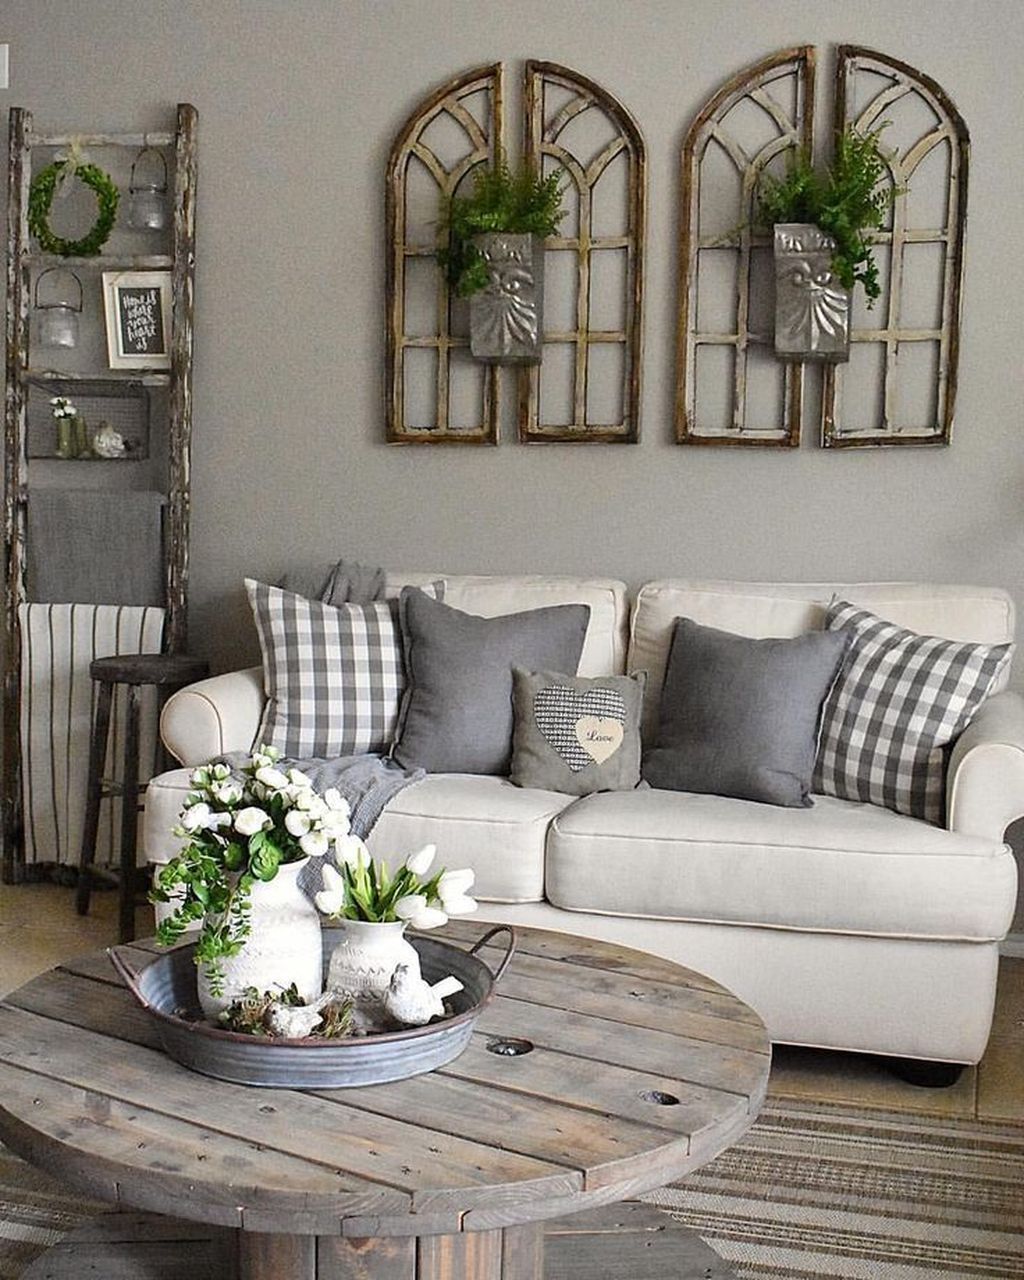 38 The Best Rustic Home Decor Ideas For Your Living Room -   14 room decor Chic farmhouse style ideas